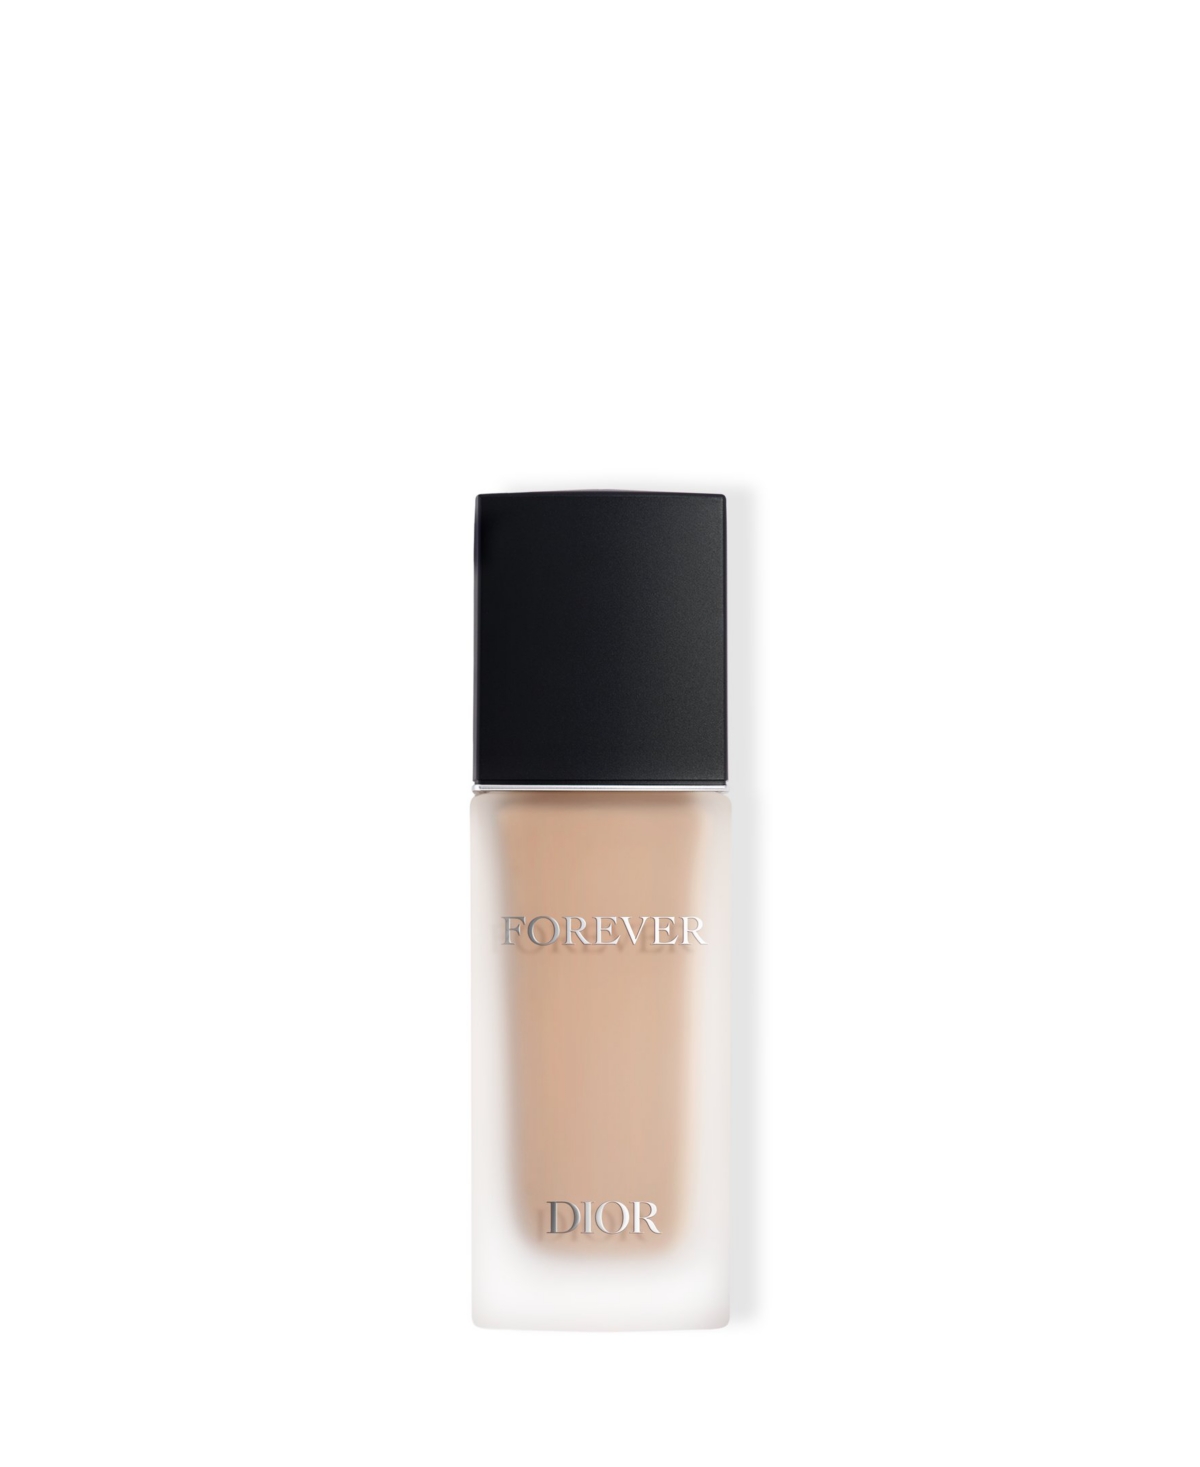 Dior Forever Matte Skincare Foundation Spf 15 In Cool Rosy (fair Skin,cool Rosy Underton